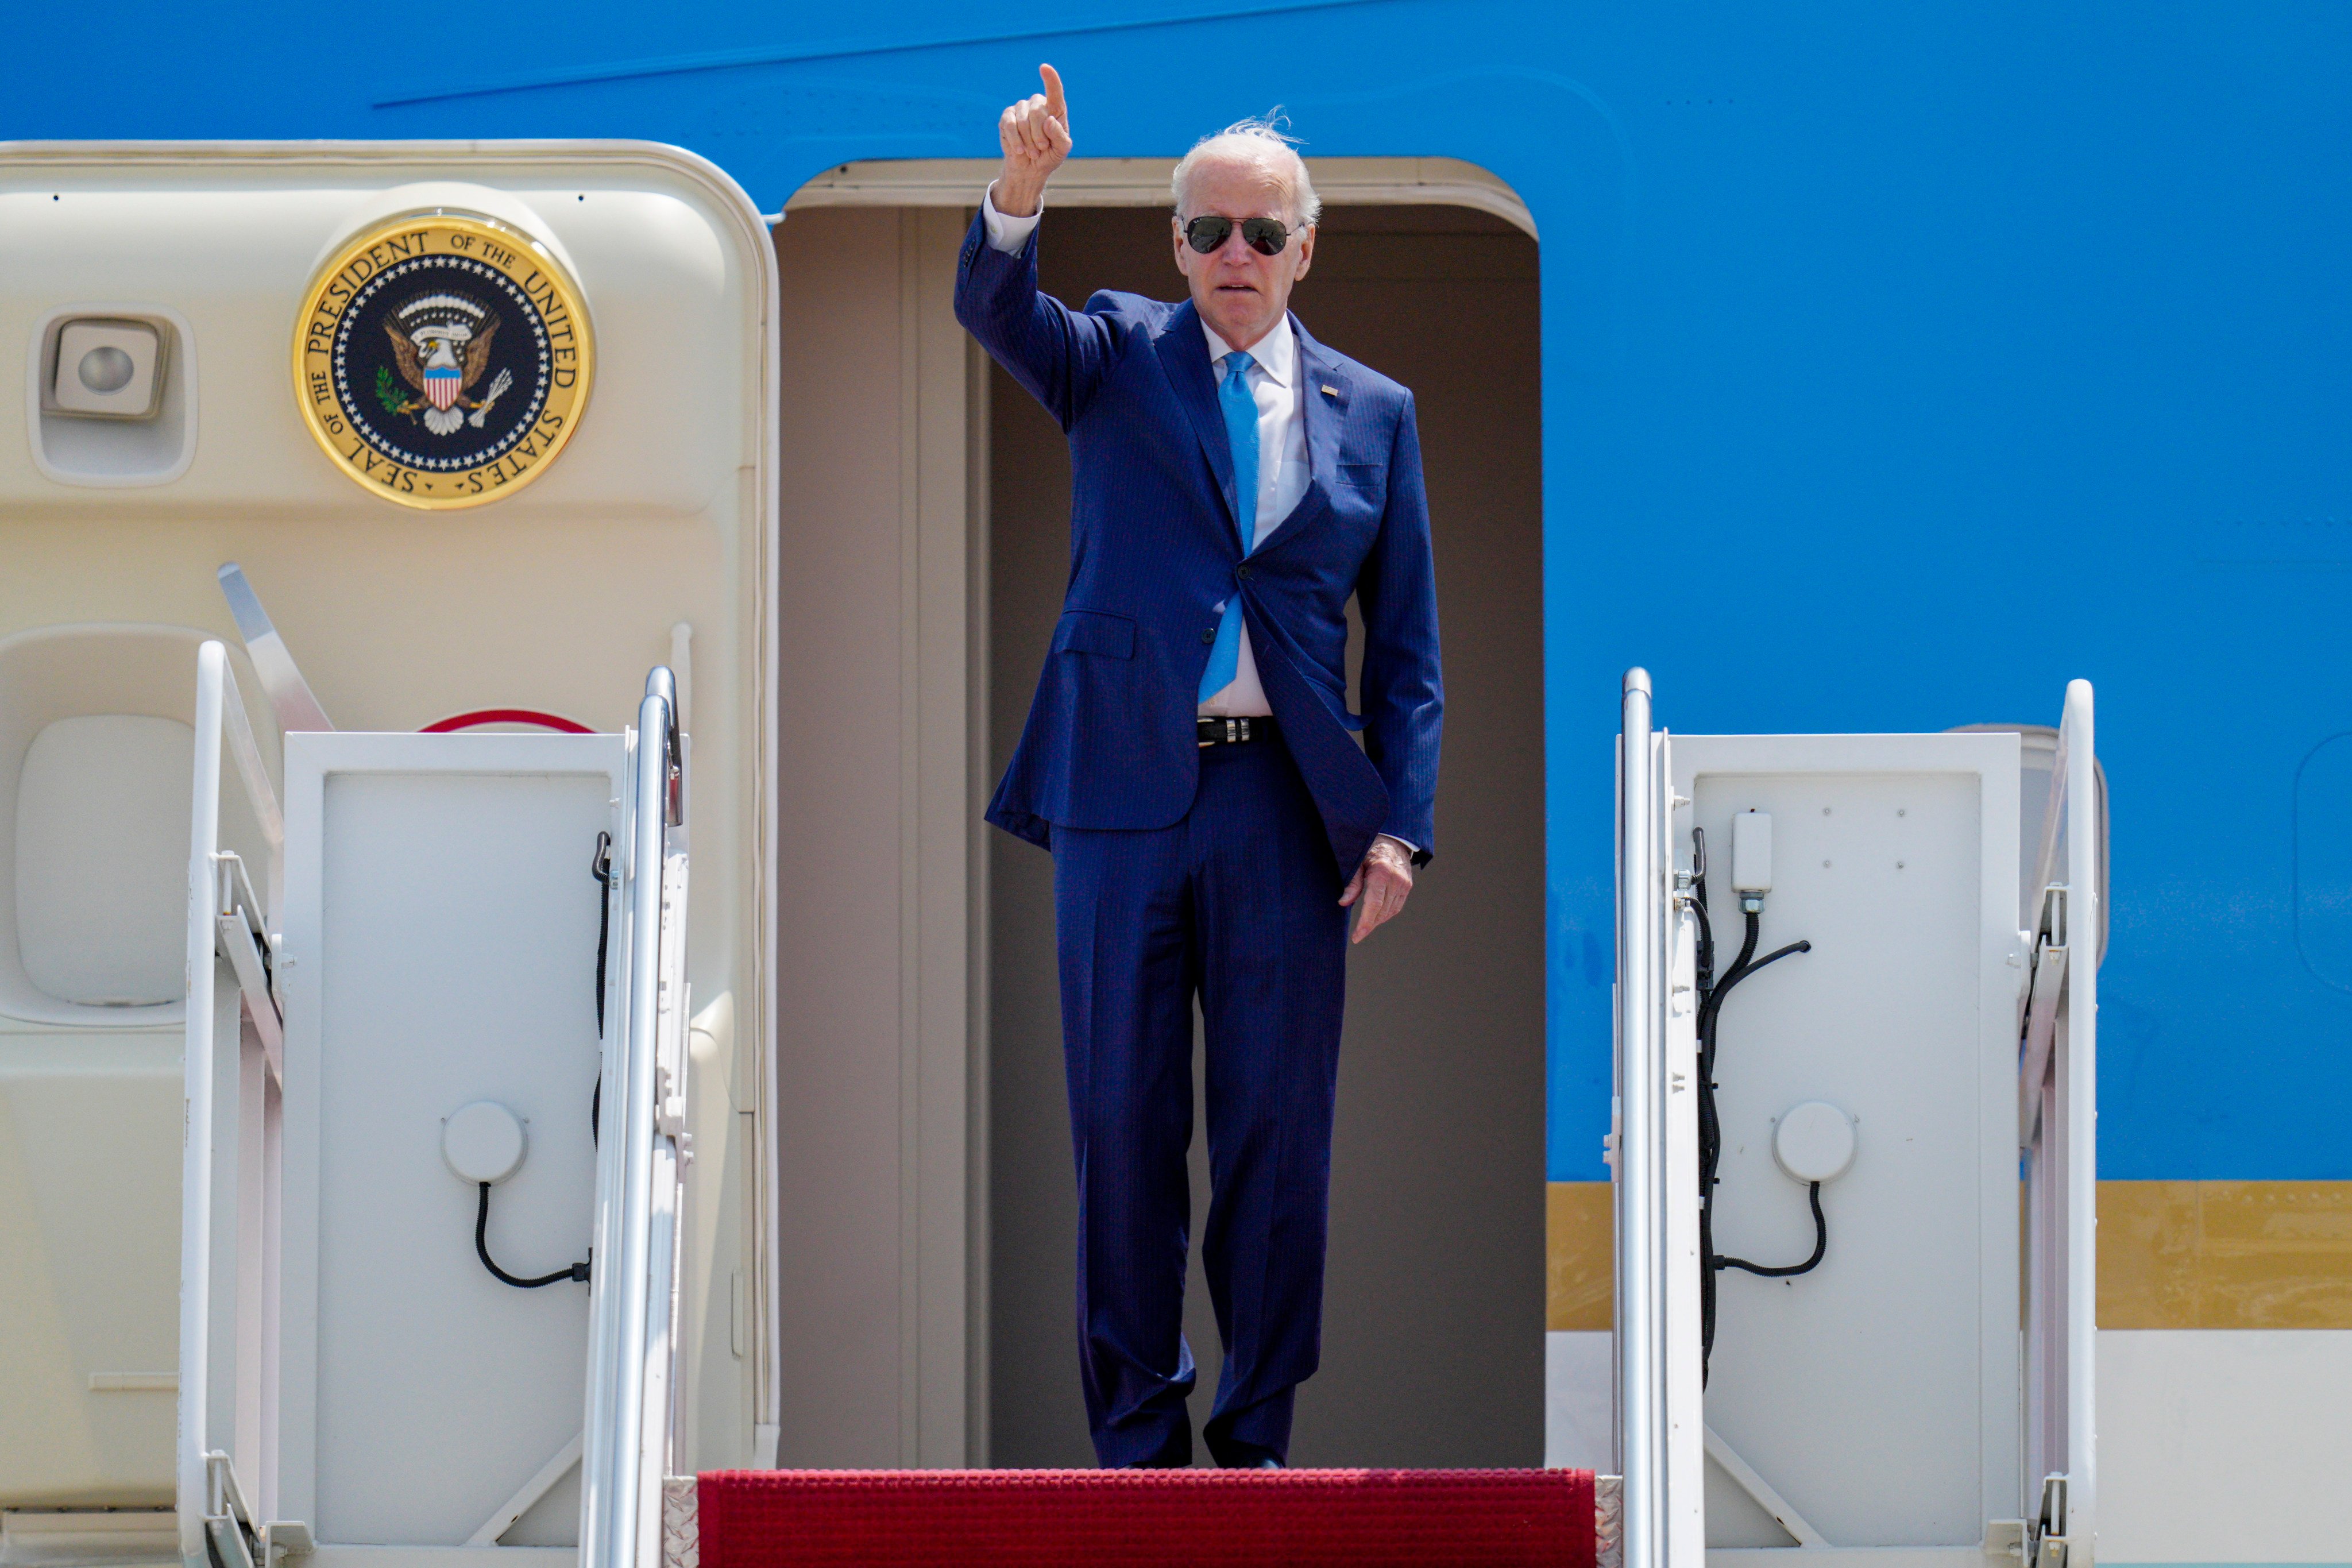 US President Joe Biden gestures as he boards Air Force One at Andrews Air Force Base on Wednesday, as he heads to Hiroshima, Japan for a G7 summit. Photo: AP